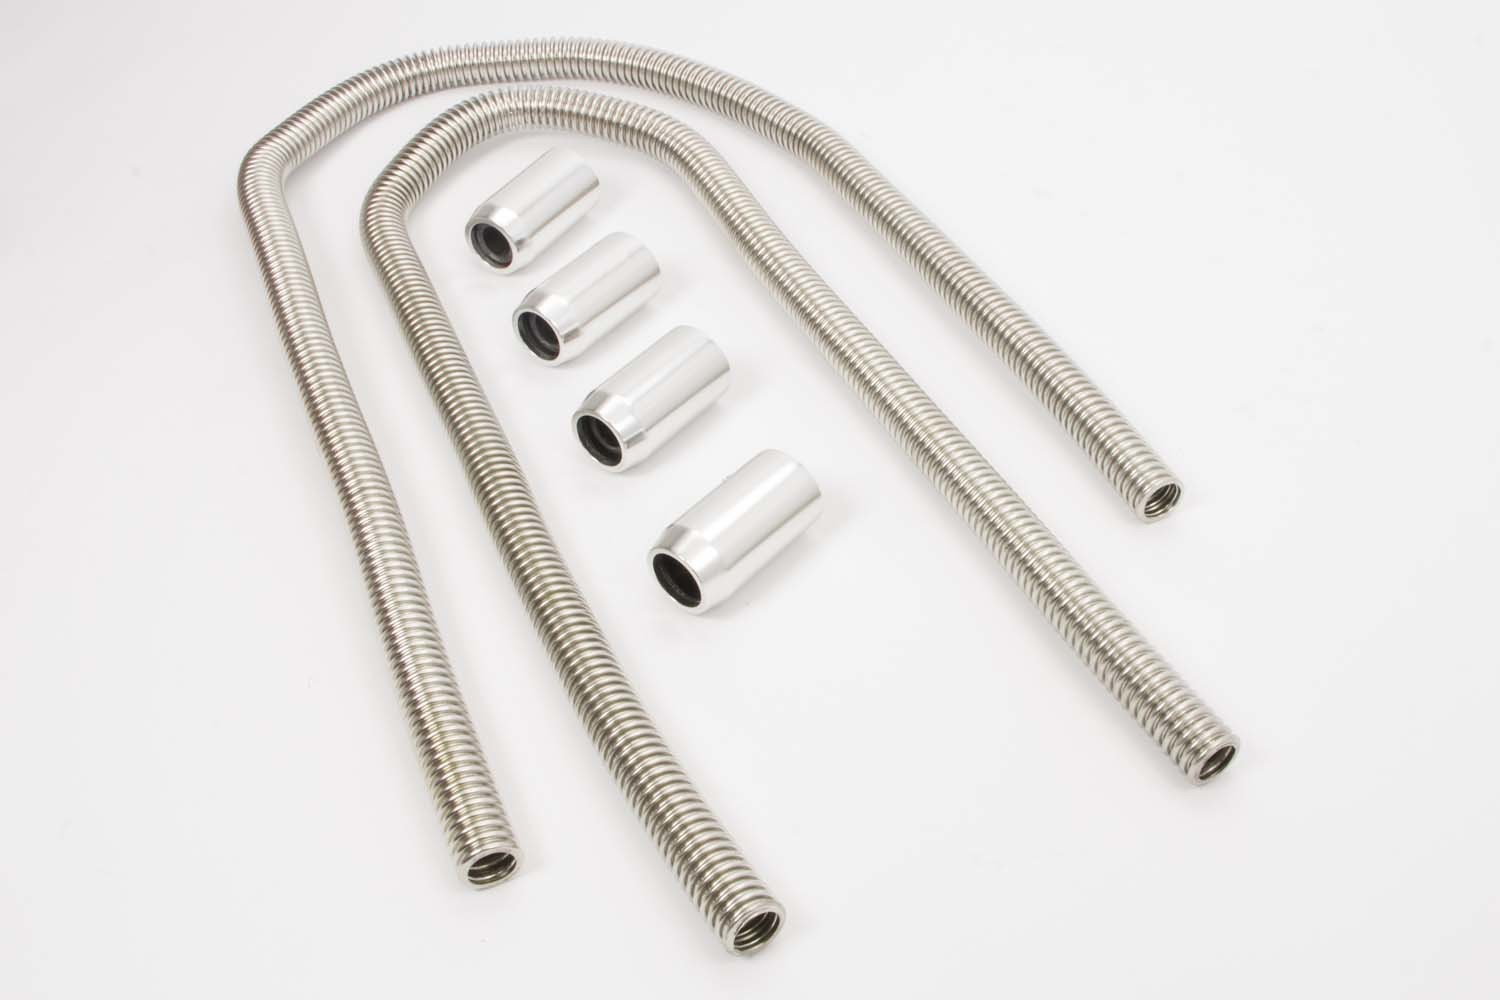 Racing Power Company R7313 Heater Hose Kit, 3/4 in OD Hose, Polished End Caps / Adapters / Clamps / Reducers, Stainless, Polished, Kit